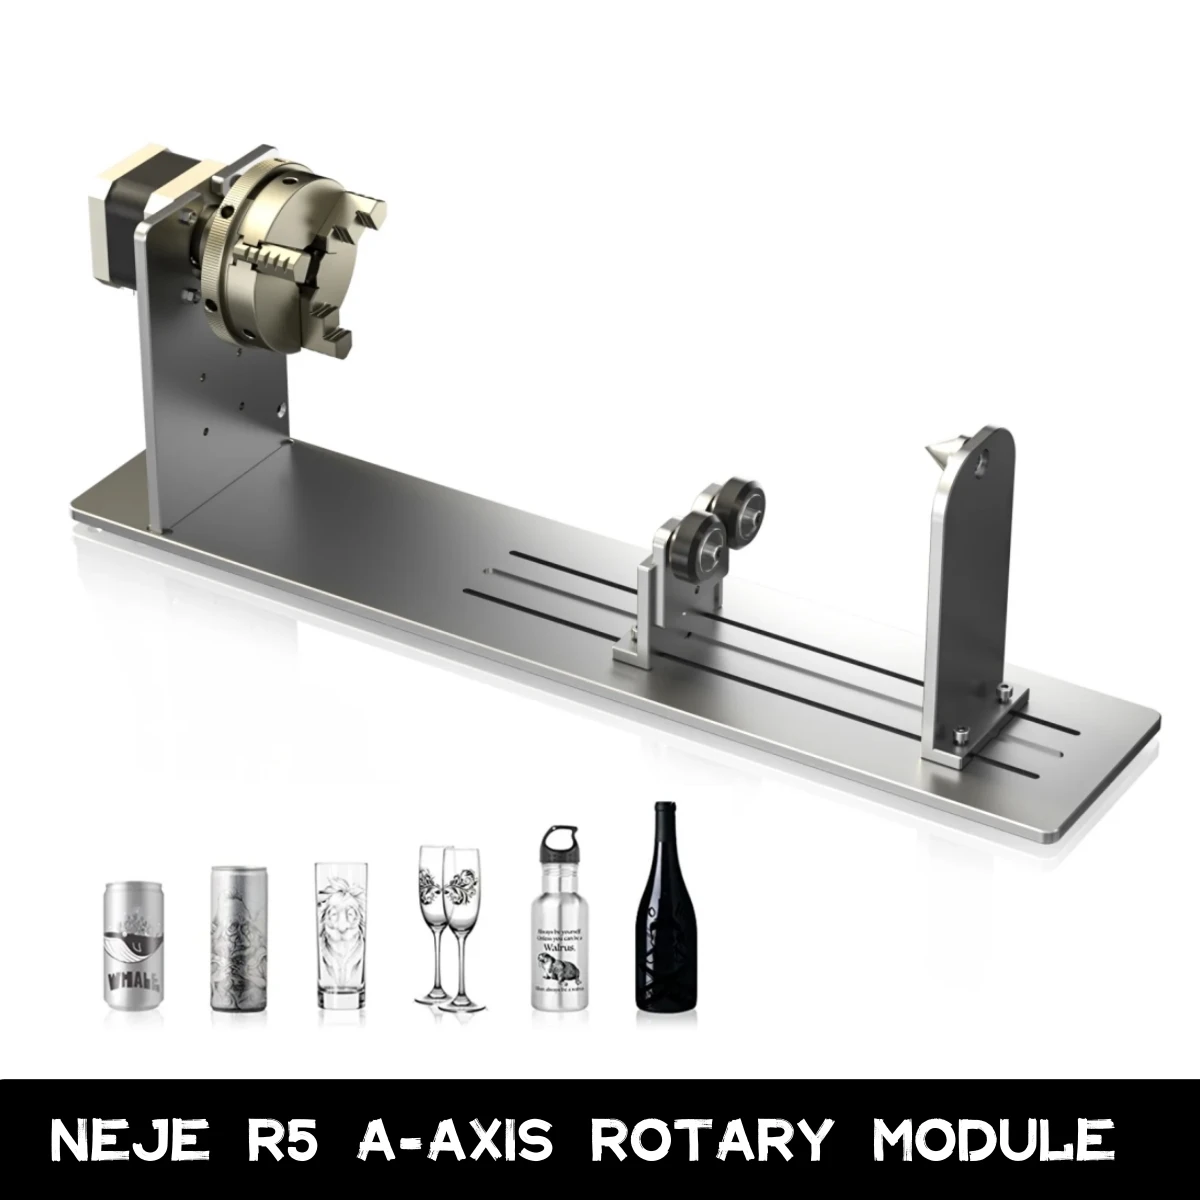 

NEJE R5 A-axis Rotary Module Cylindrical Cans Cylinders Rotary Table Rotary Pen Jig Tool, for CNC Laser Engraver